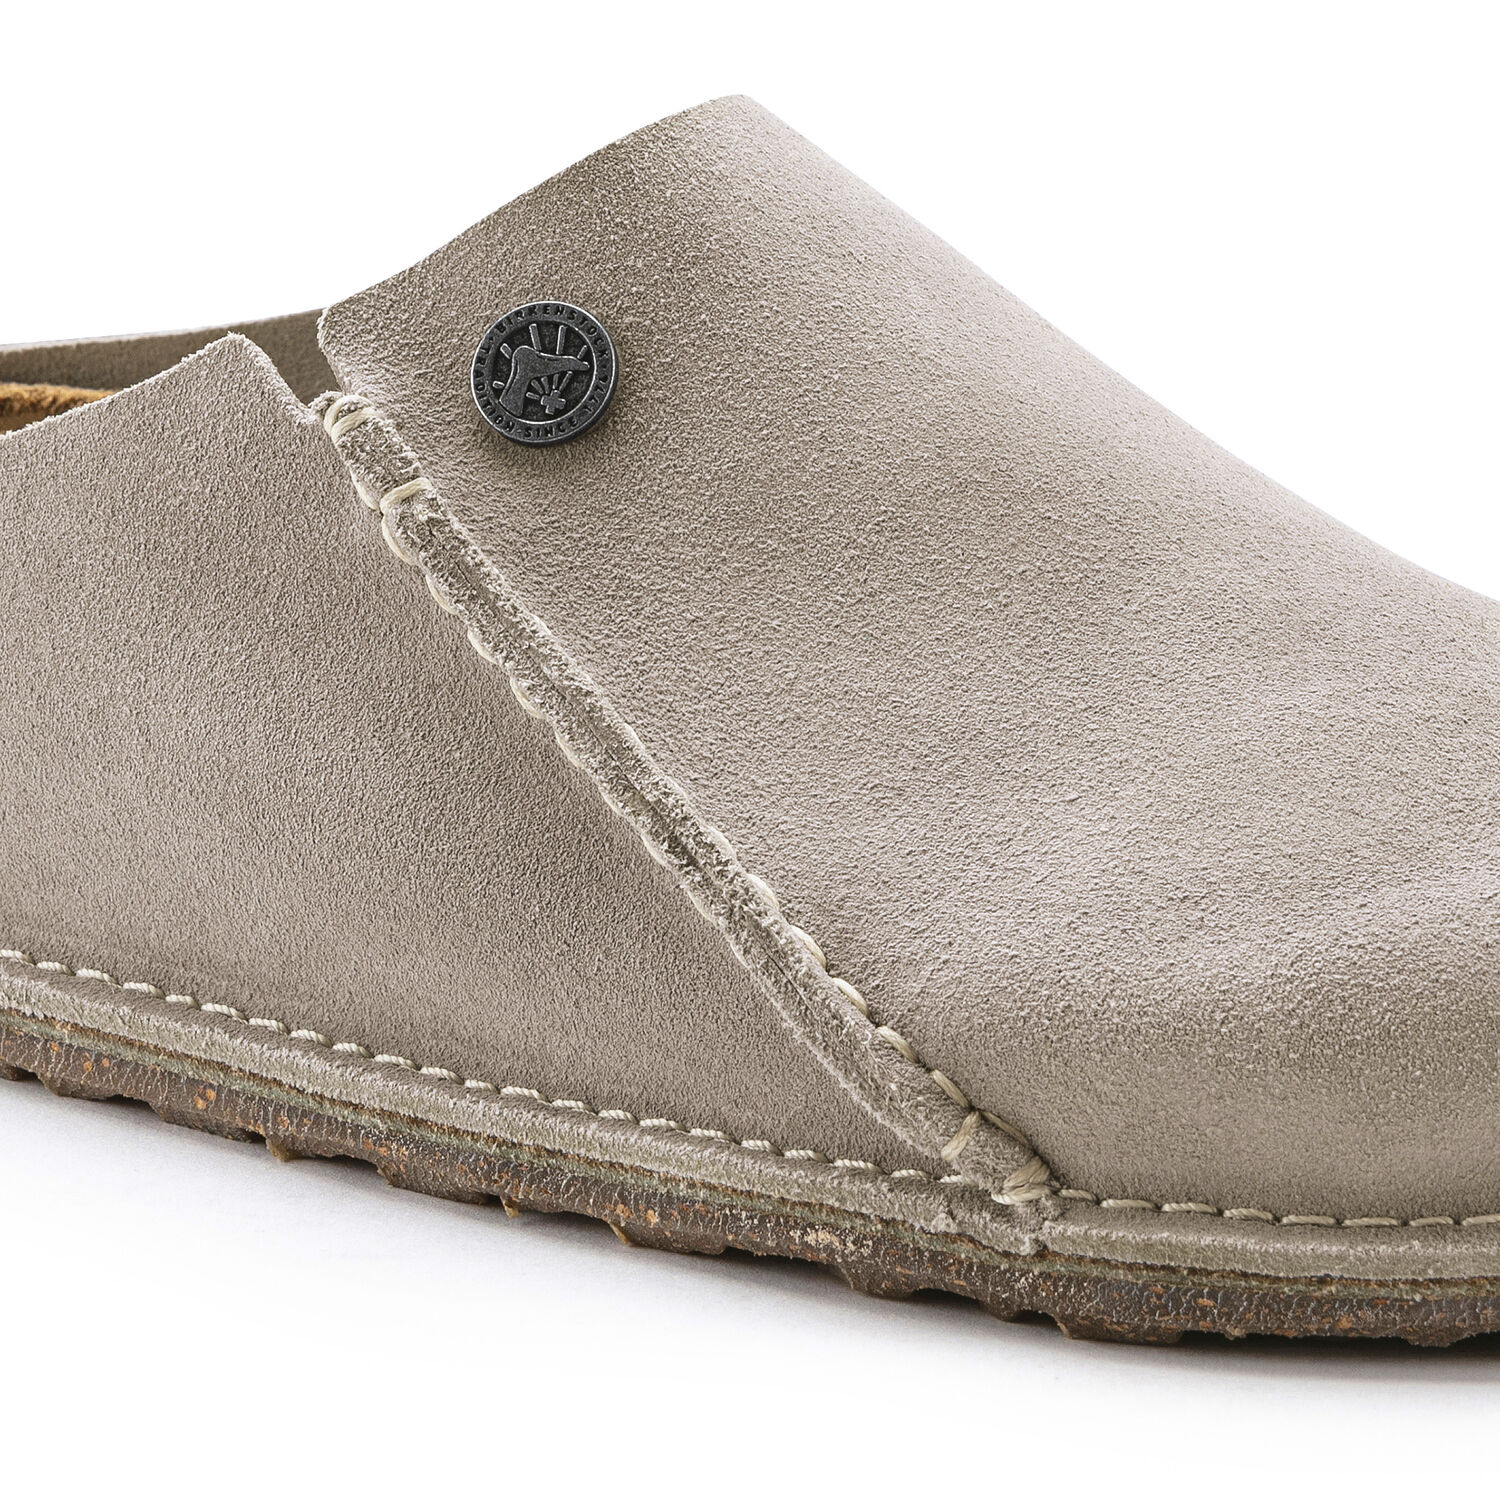 Birkenstock Zermatt Premium Suede Stone Coin Clog Removable Footbed Made In Germany